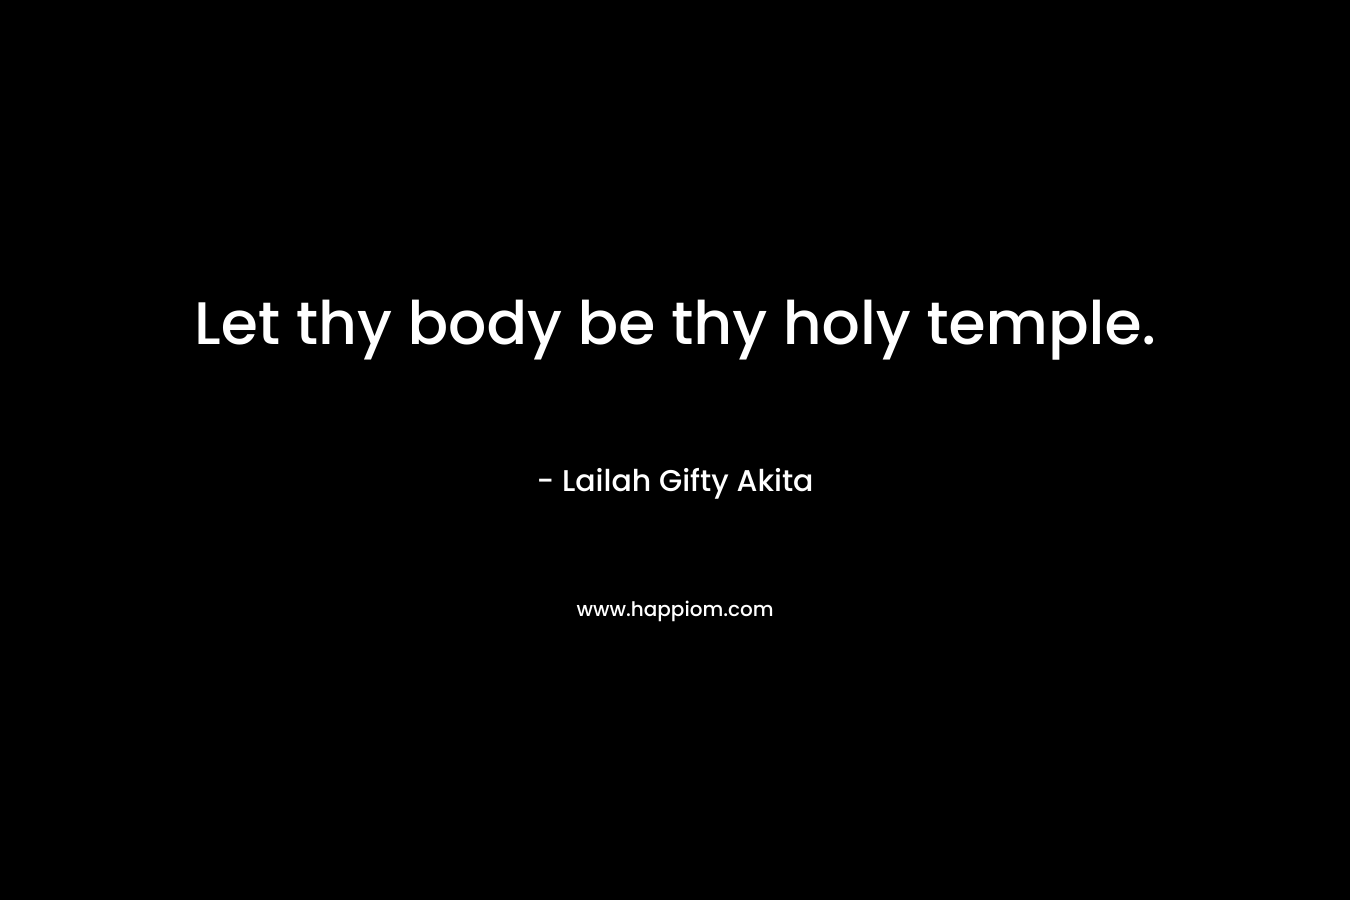 Let thy body be thy holy temple.